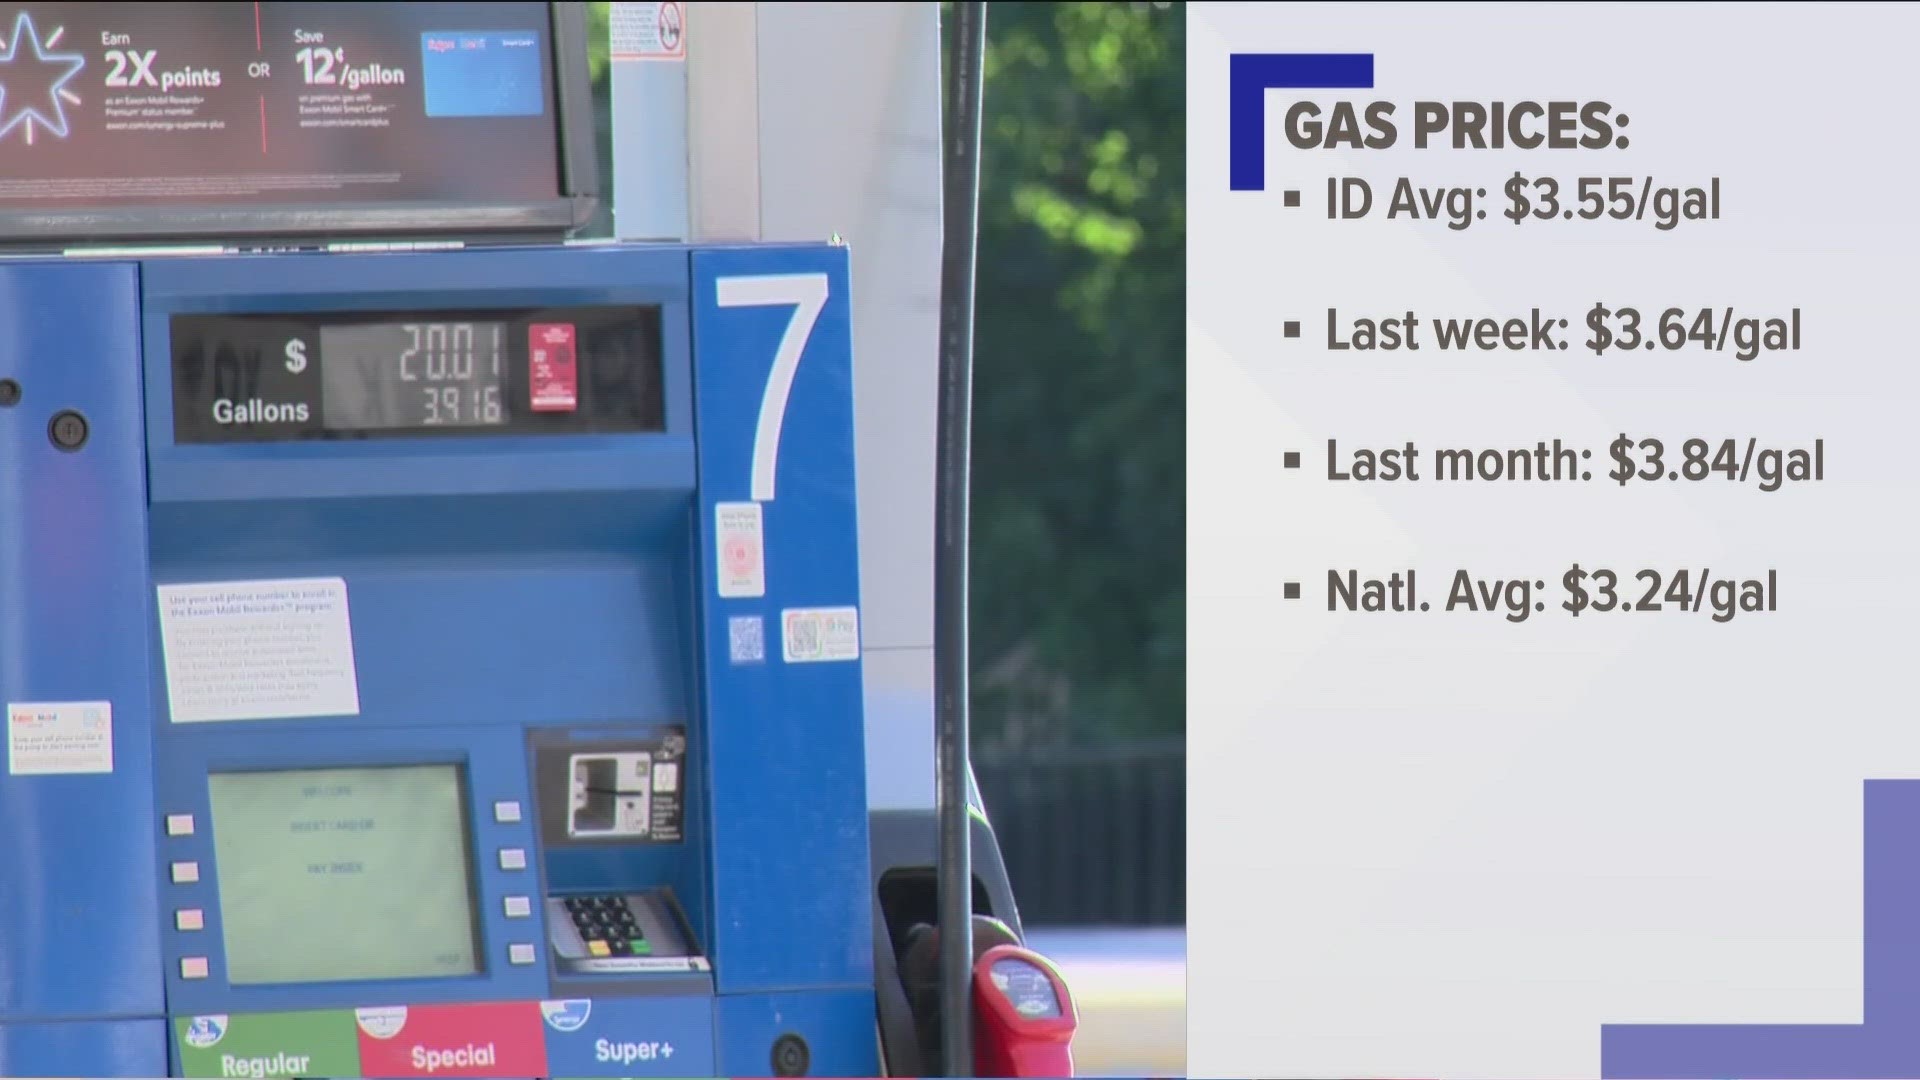 With gas prices dropping in Idaho every week, GasBuddy discusses the future of gas prices and national averages.